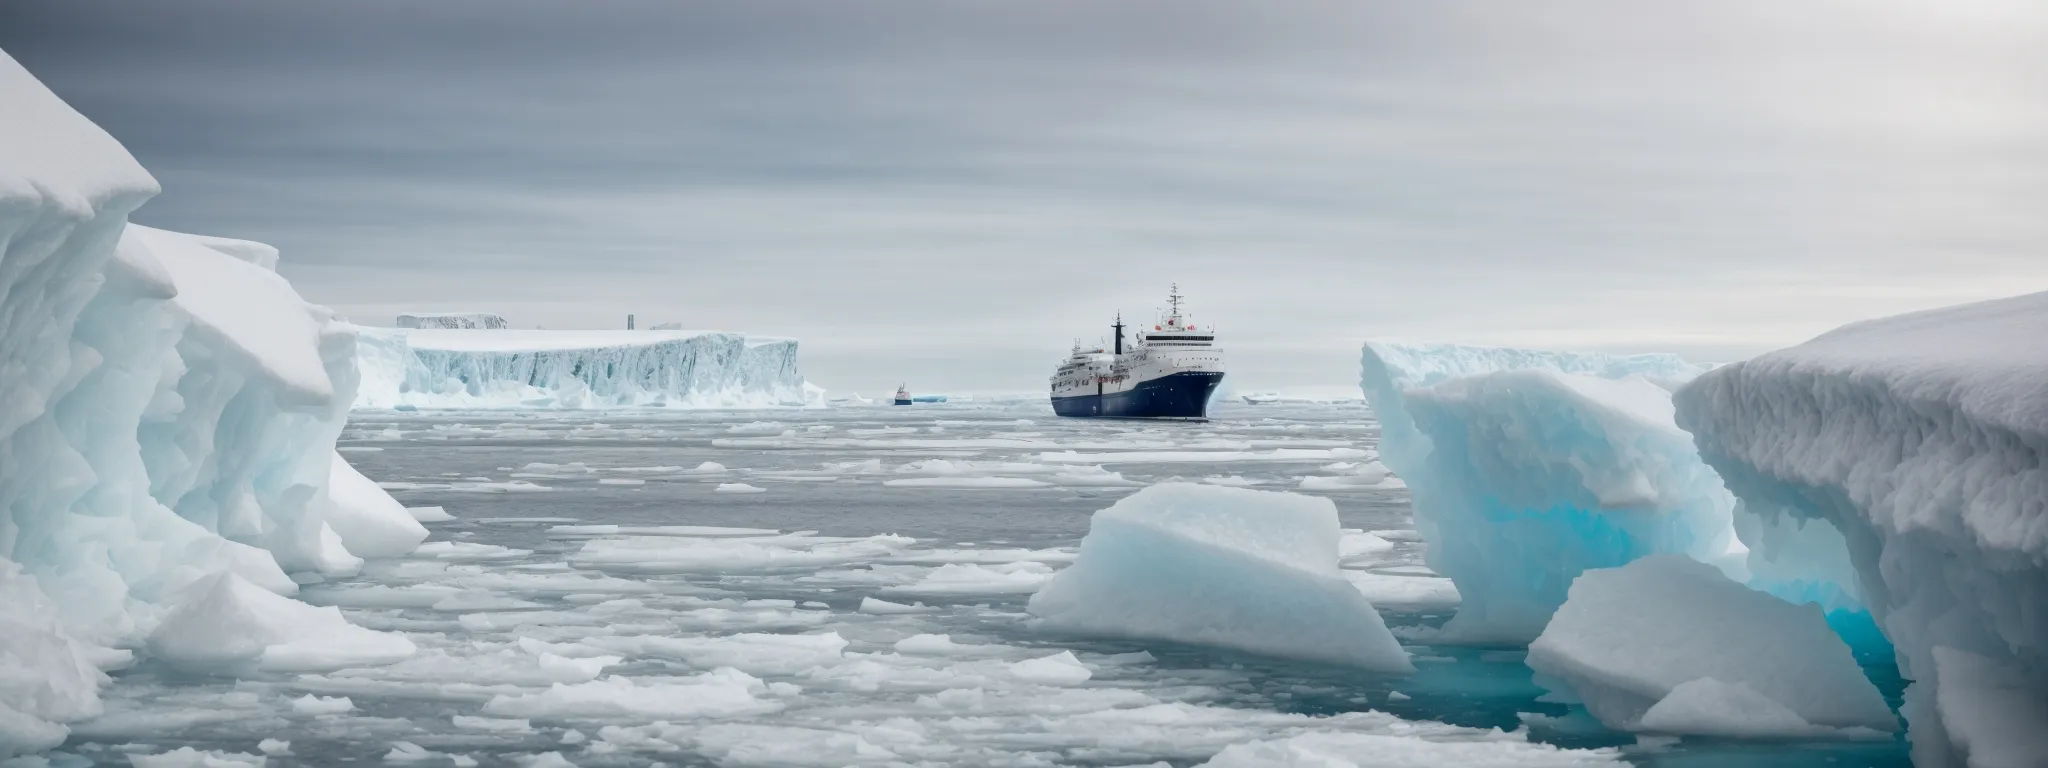 a ship navigates through a clear path in the ice, avoiding the heavier, cluttered icebergs to symbolize a strategic and unencumbered seo journey.